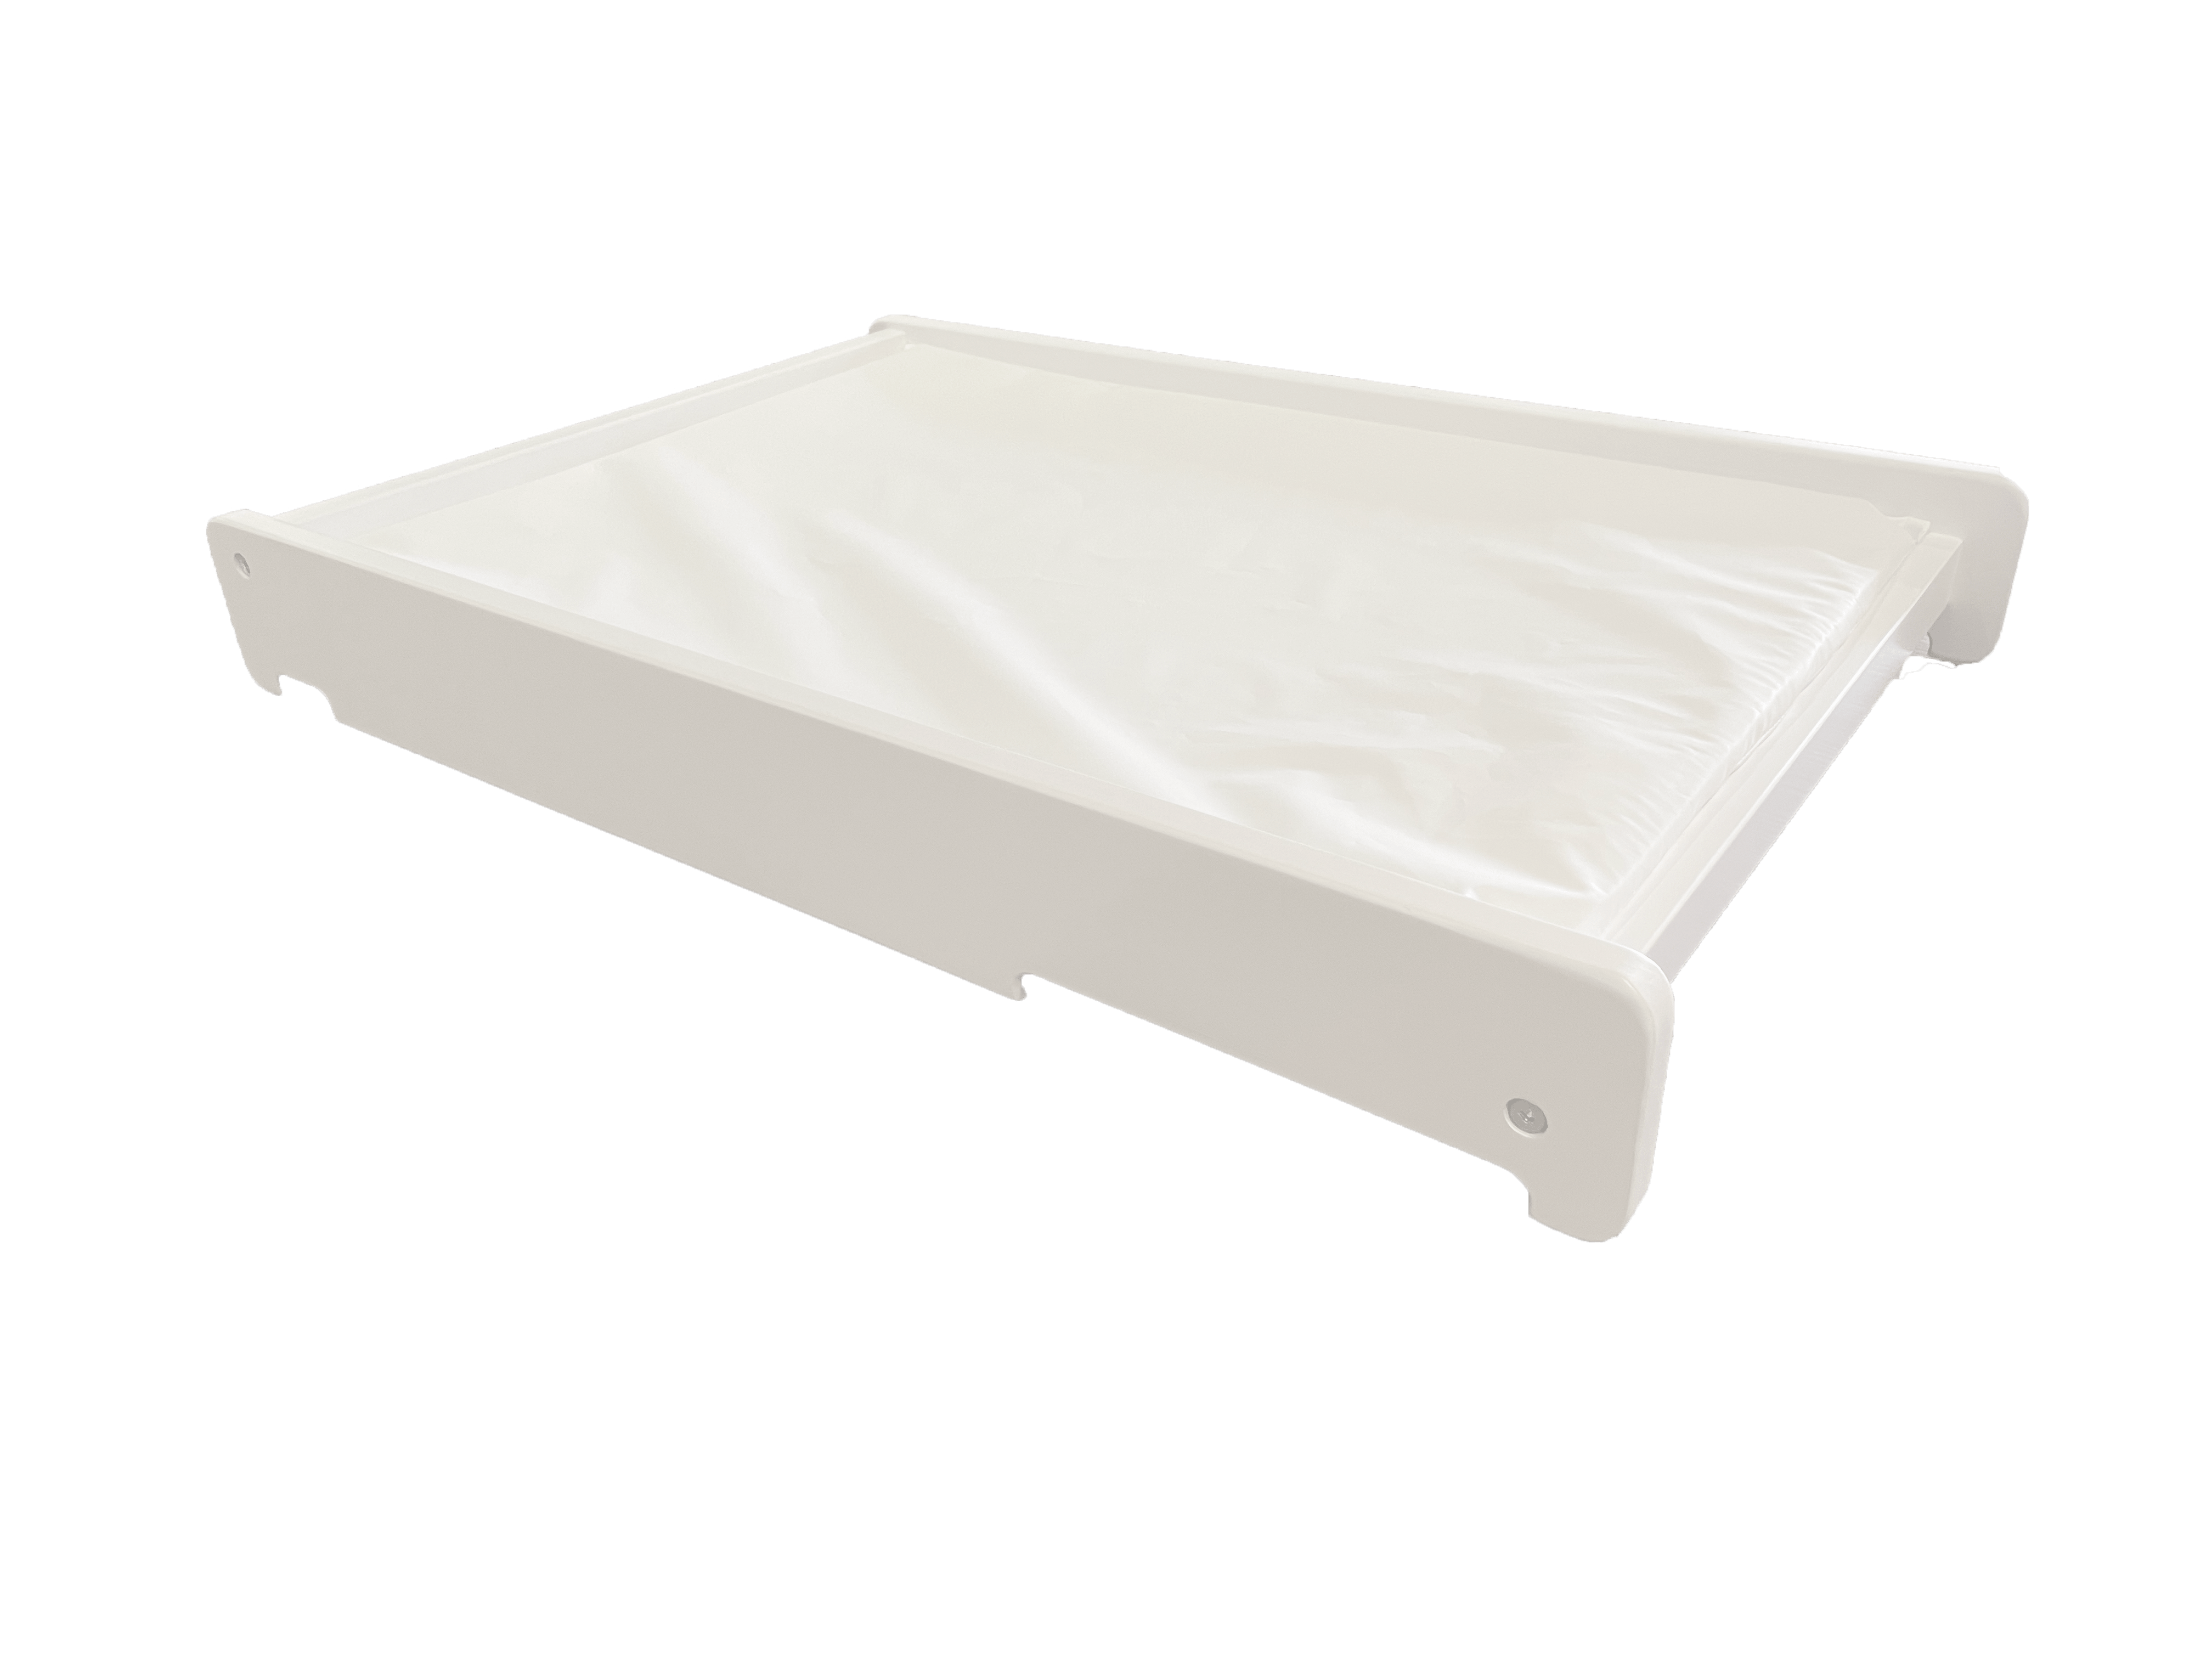 MOOB Baby Cot Changing Table (Changing Mat Included)